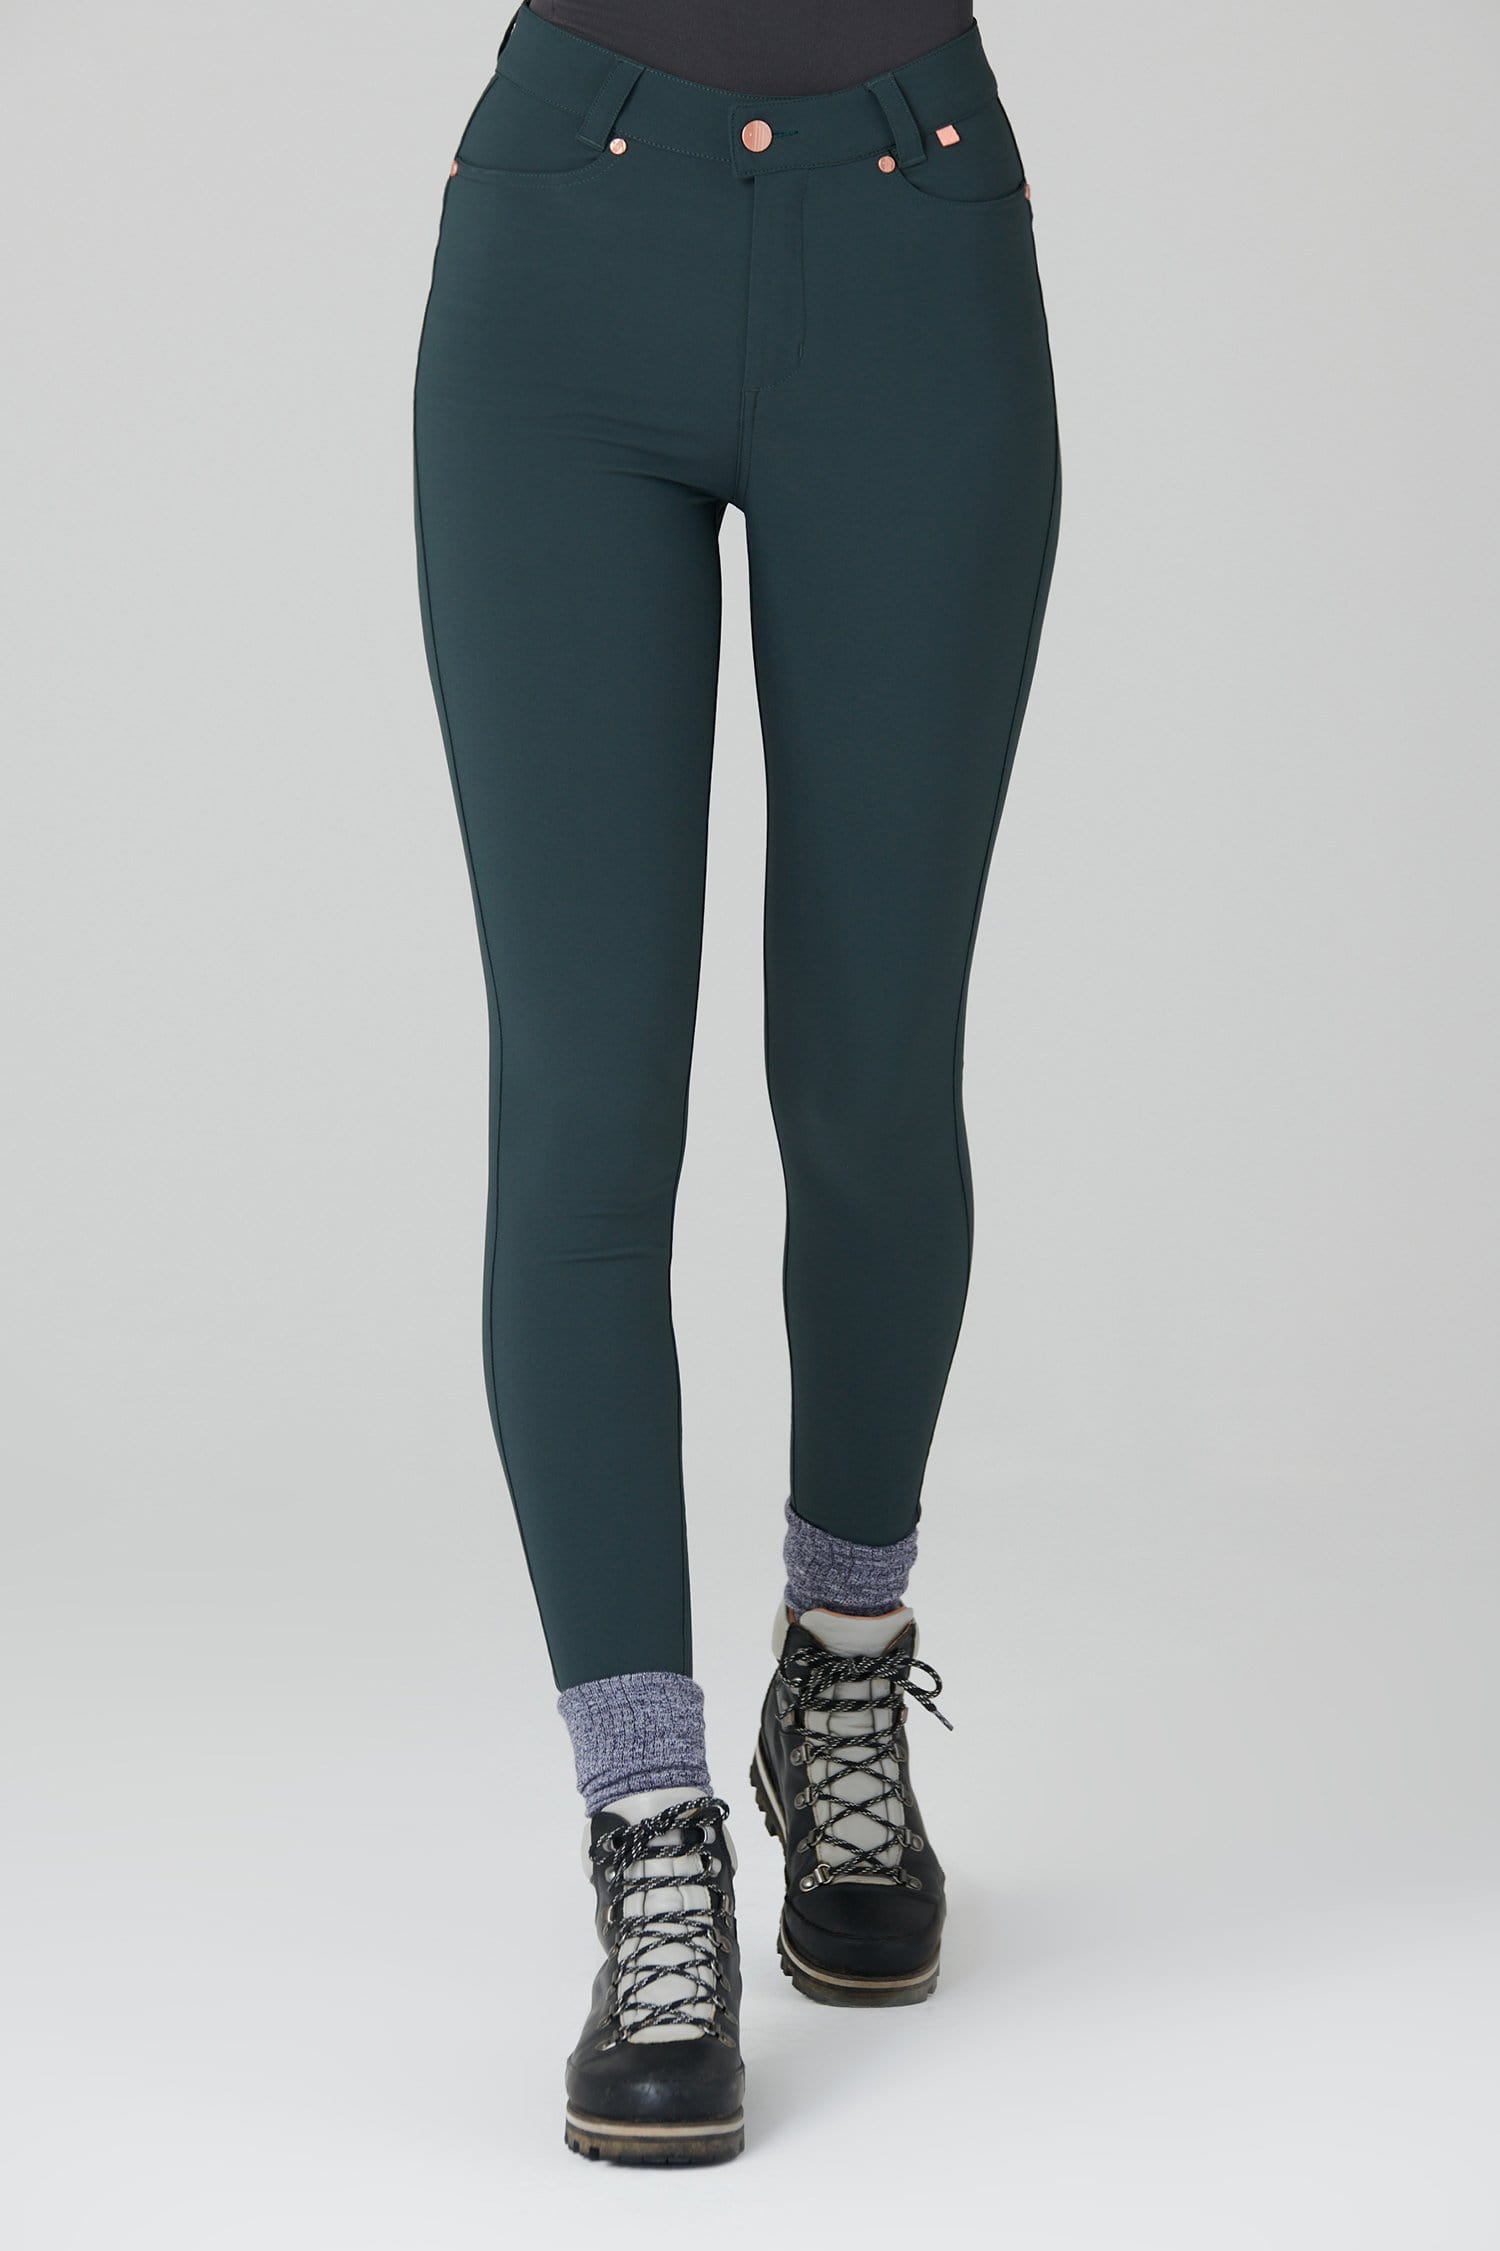 Thermal Skinny Outdoor Trousers - Forest Green - 34l / Uk16 - Womens - Acai Outdoorwear